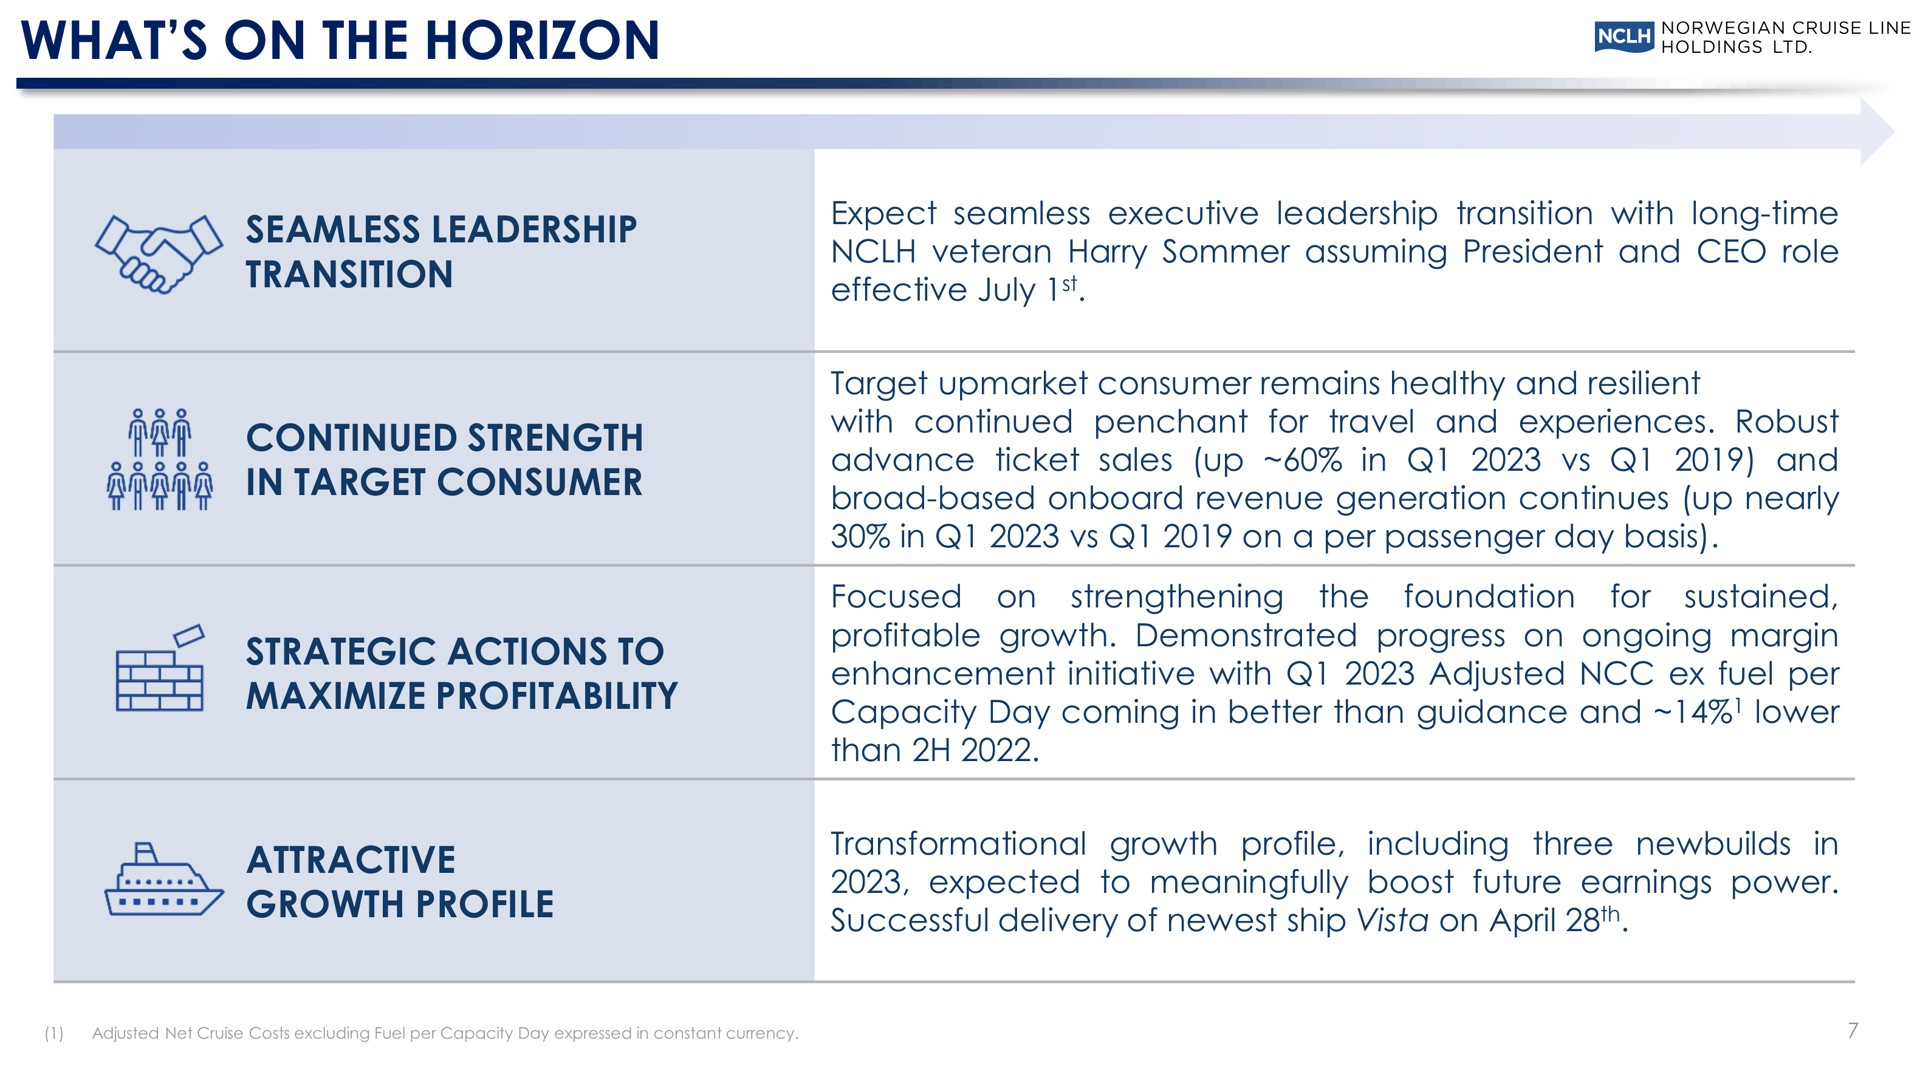 what on the horizon seamless leadership transition continued strength in target consumer strategic actions to maximize profitability attractive growth profile cruise line | Norwegian Cruise Line